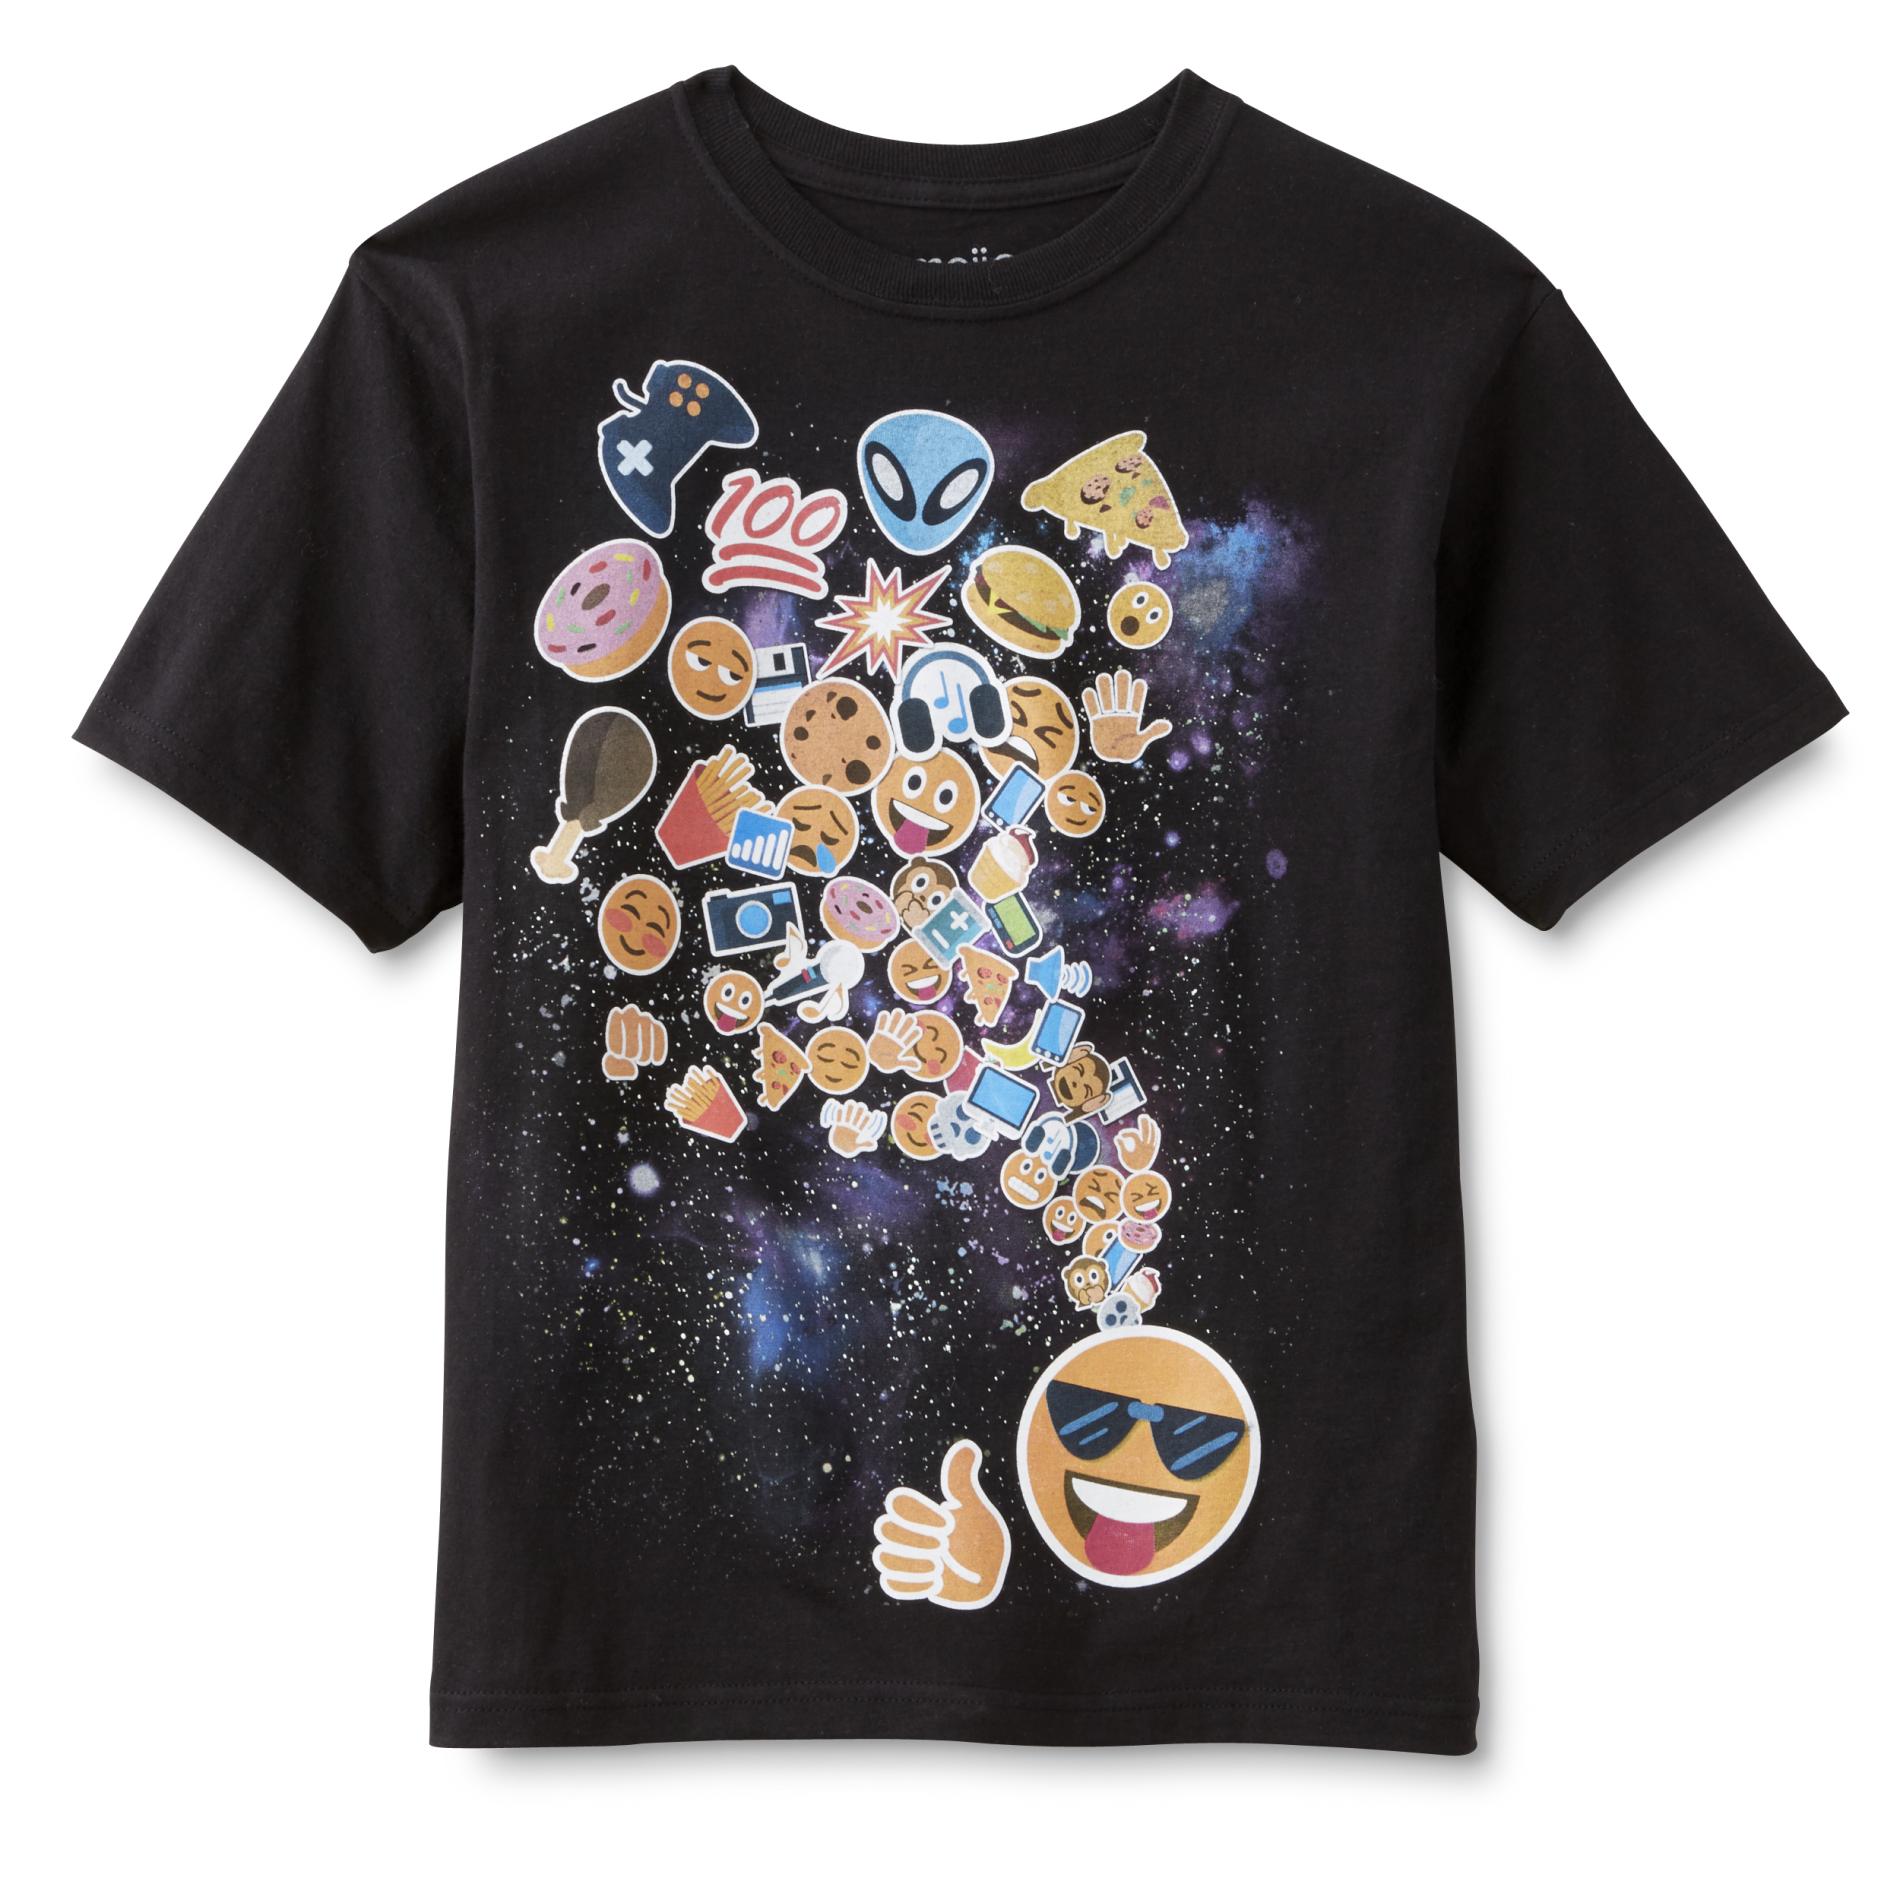 Emoji One Boy's Graphic T-Shirt - Outer Space